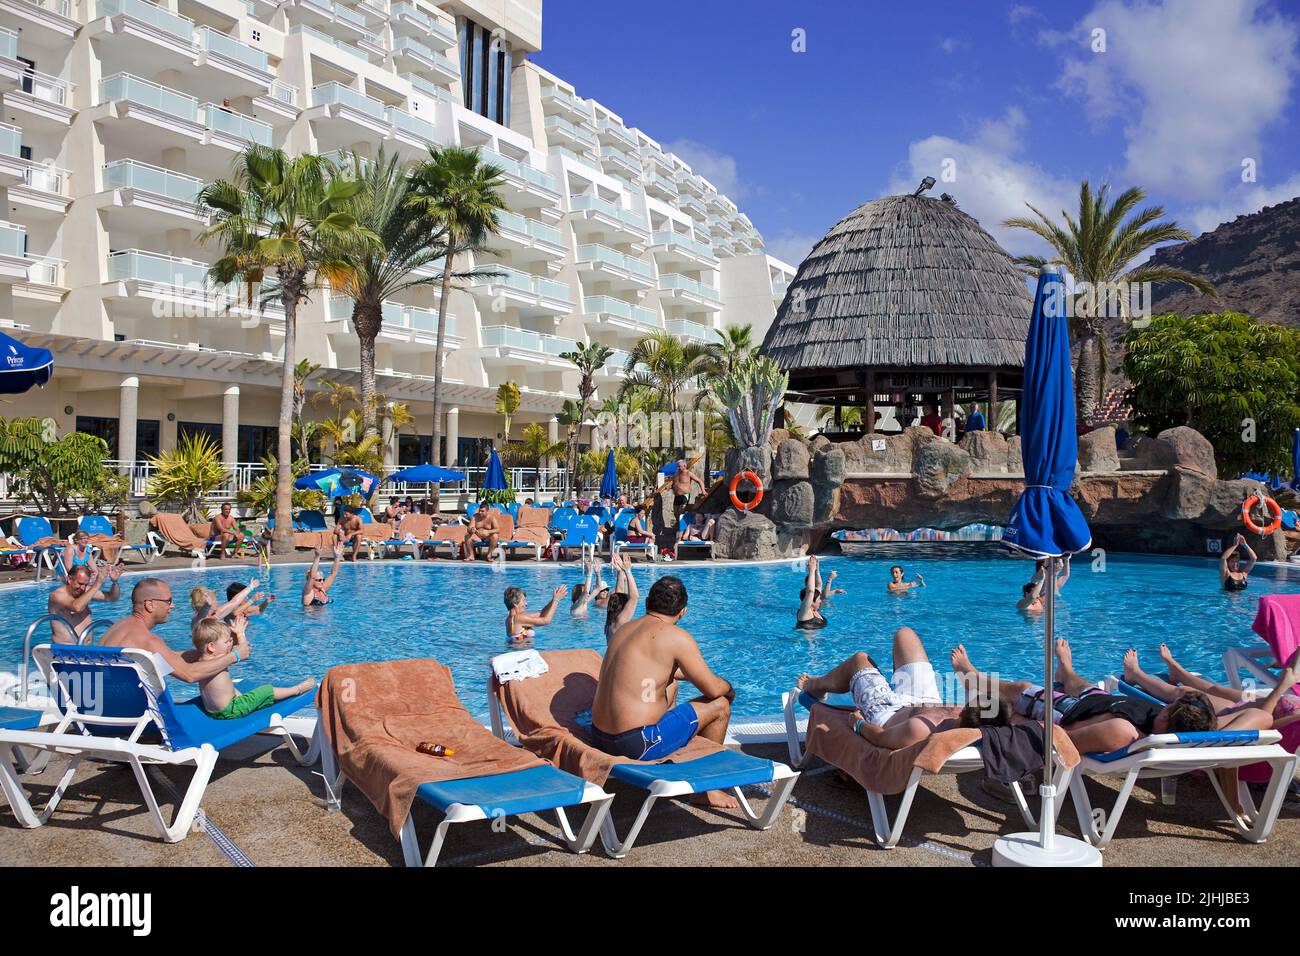 Pool animation at a hotel, Taurito, Grand Canary, Canary islands, Spain, Europe Stock Photo